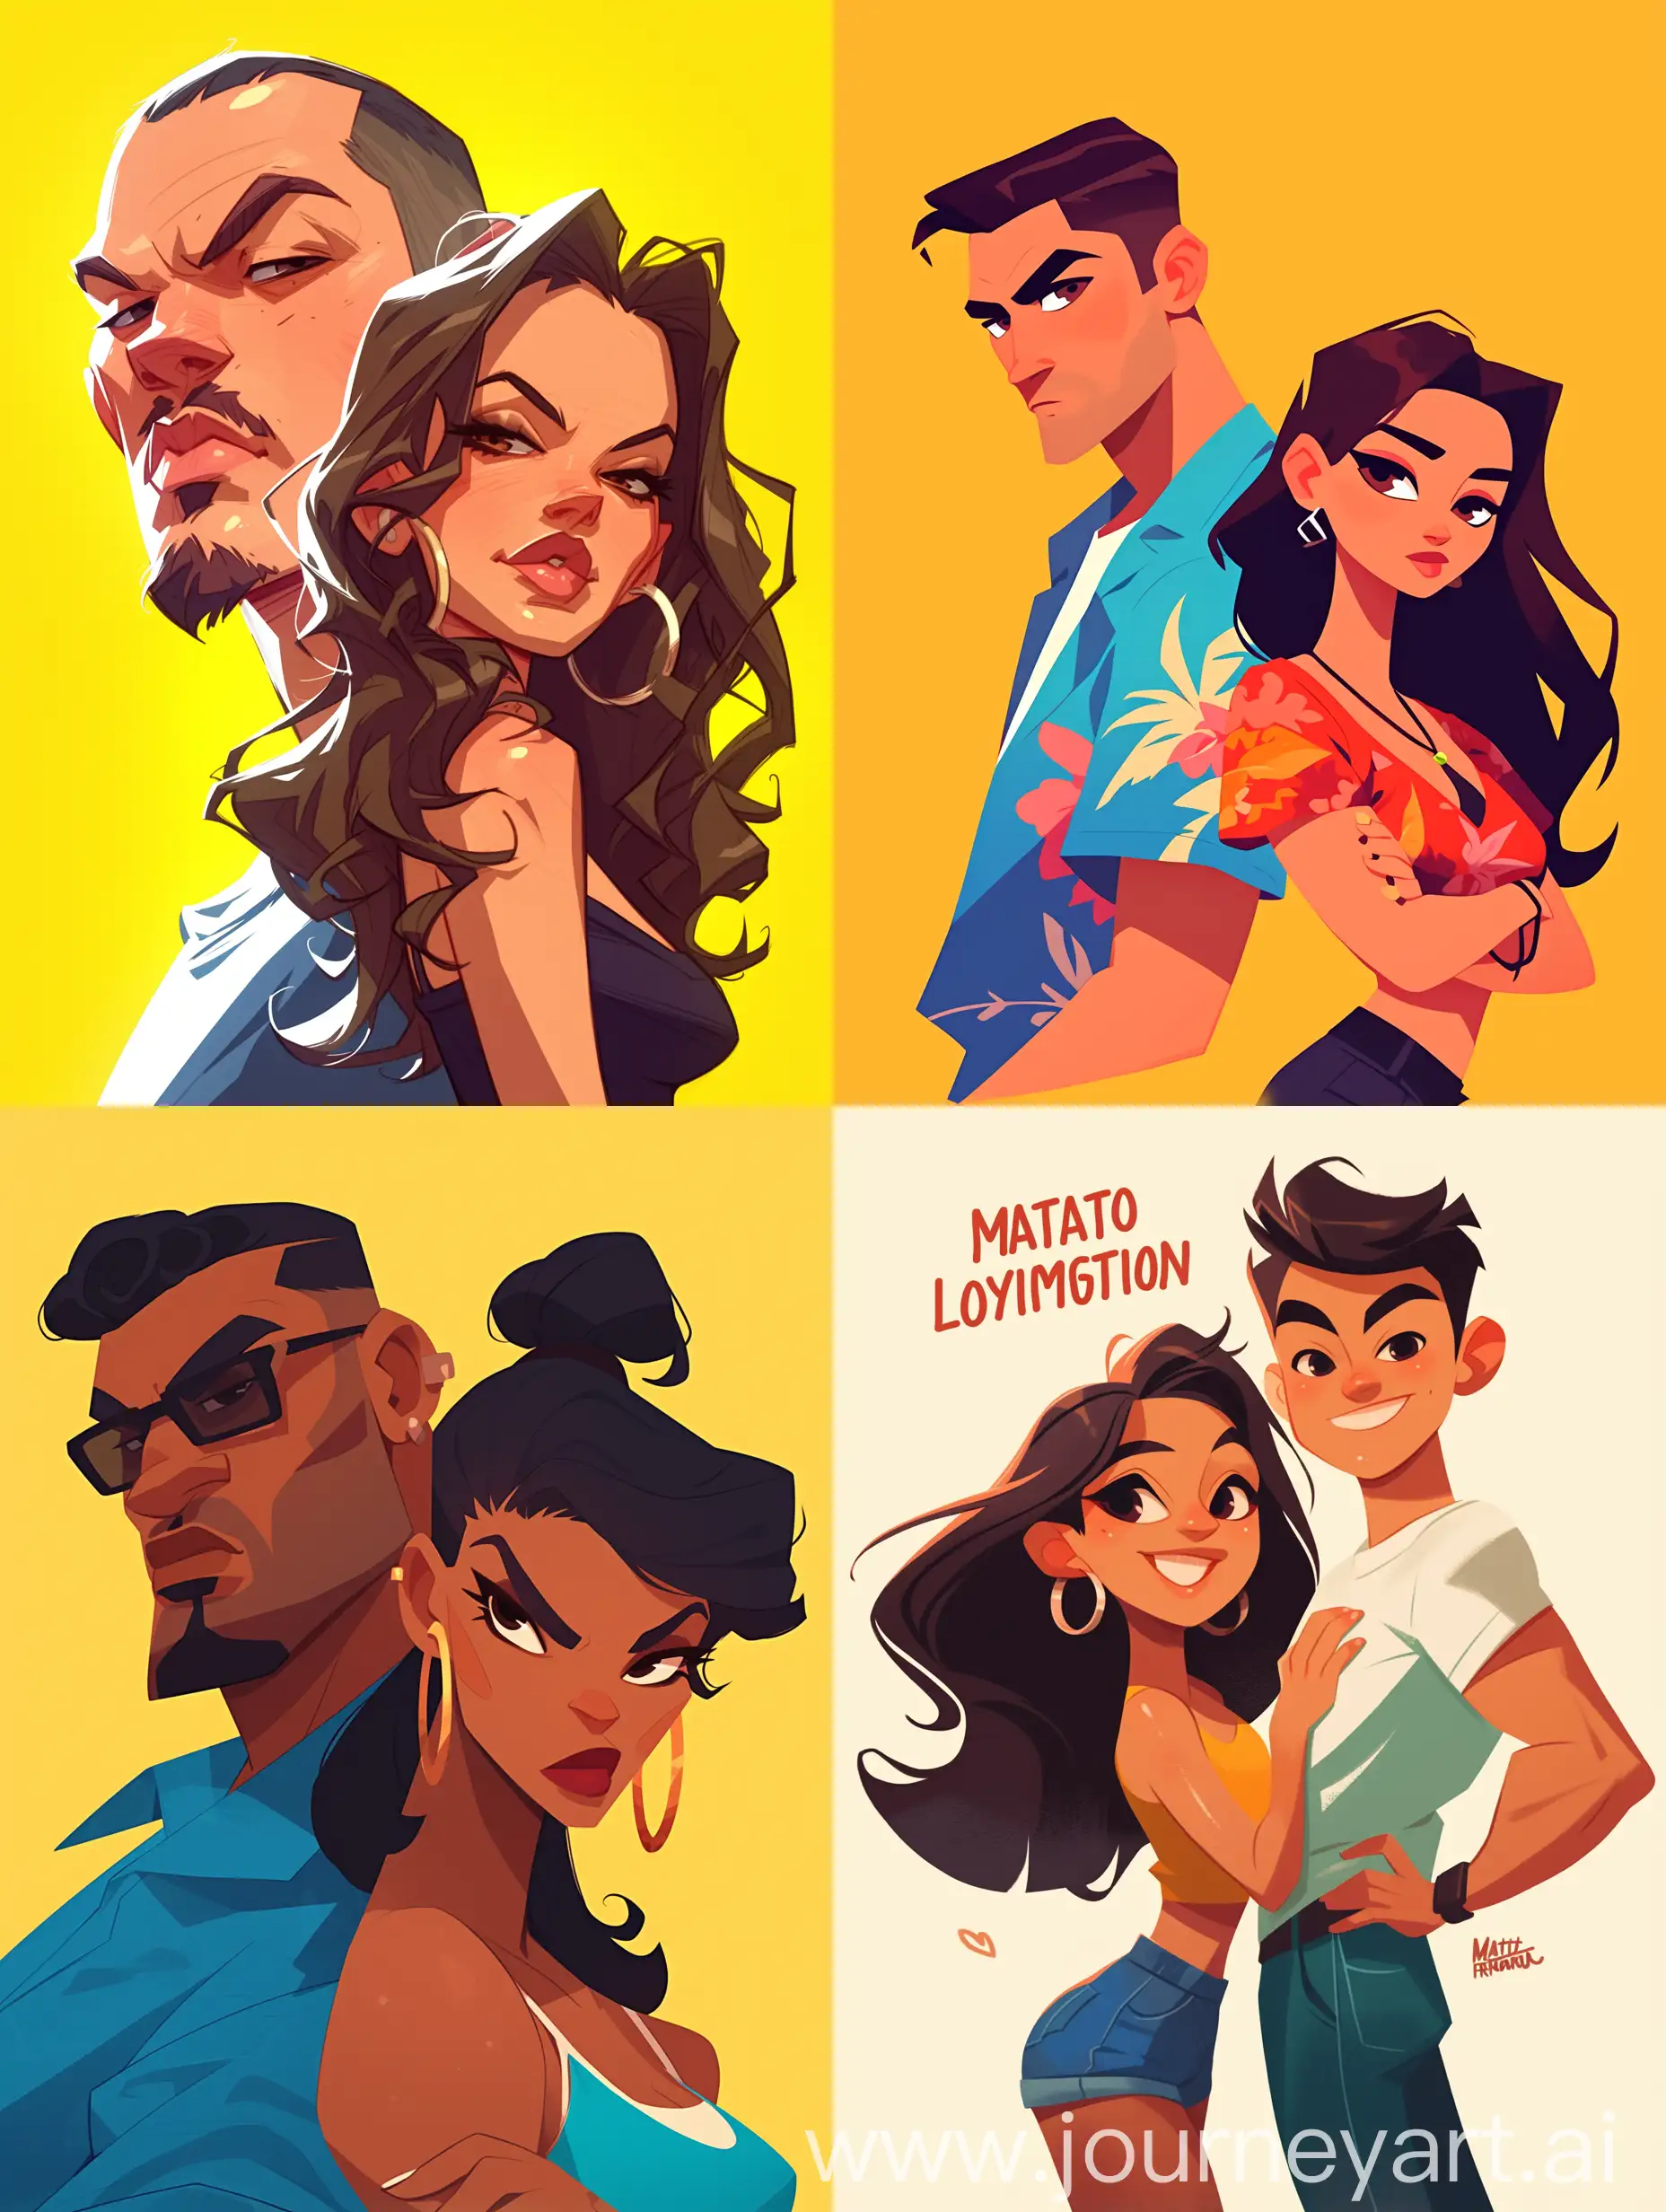 Latinos-Young-Male-and-Female-Cartoon-Caricature-Portrait-Poster-by-Matt-Fraction